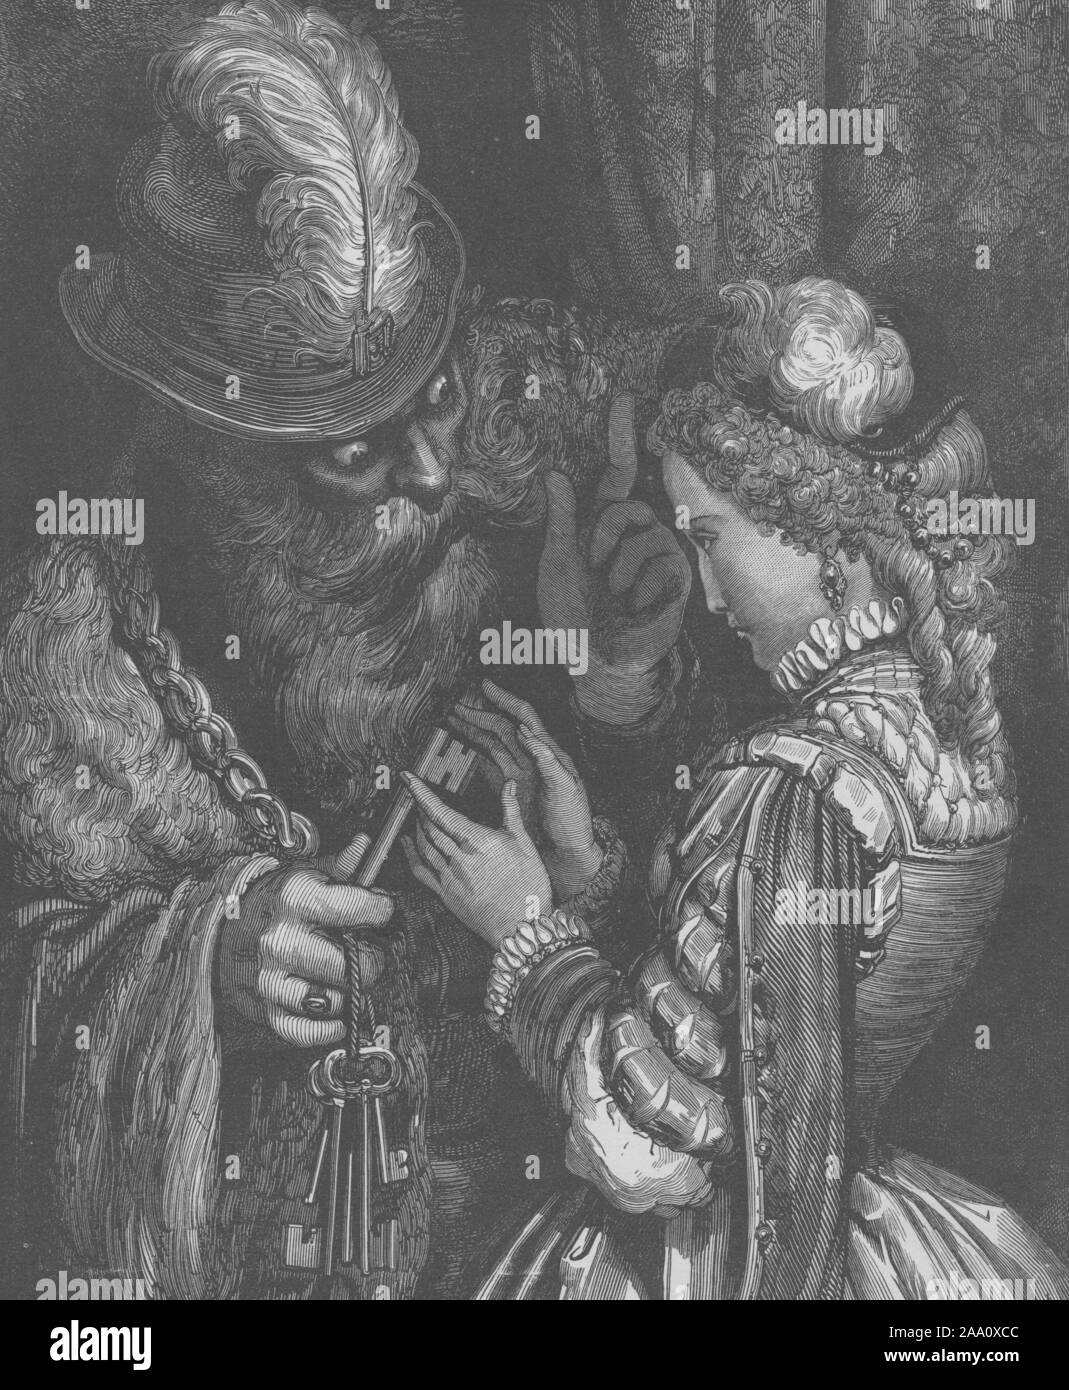 Engraved illustration of a scene from the book 'Blue Beard' by author Charles Perrault, featuring Bluebird giving a key to Fatima, illustrated by Gustave Dore, published by James Miller, 1871. From the New York Public Library. () Stock Photo